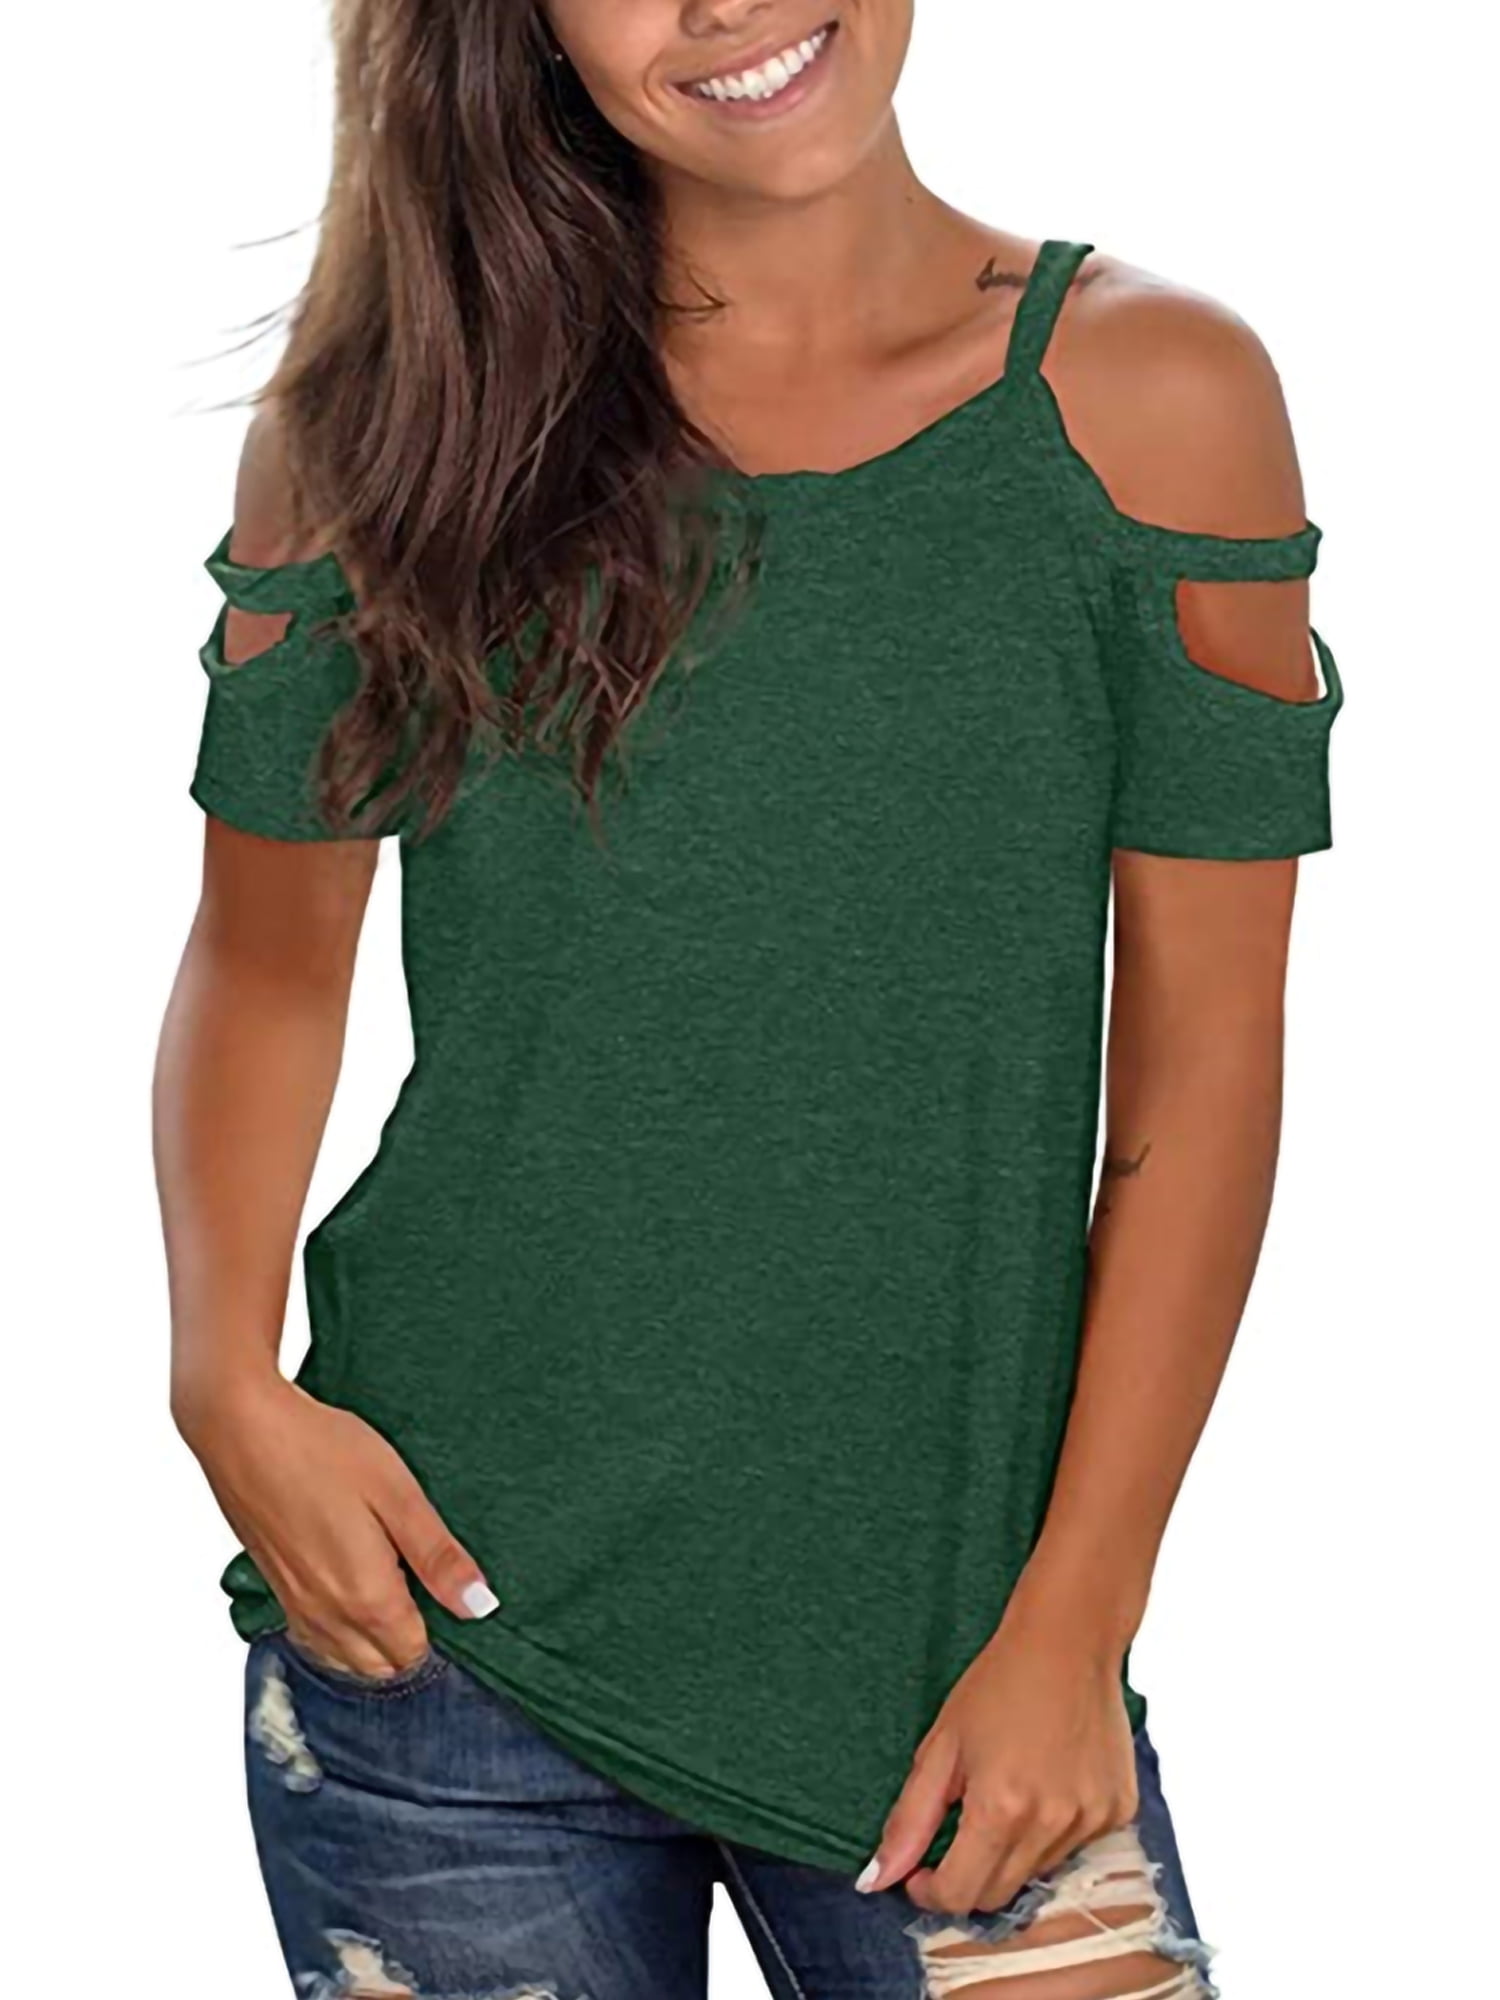 Women Off Shoulder T-Shirt Tops Ladies Solid Short Sleeve Button Tee Shirt Blouse Tunic Top